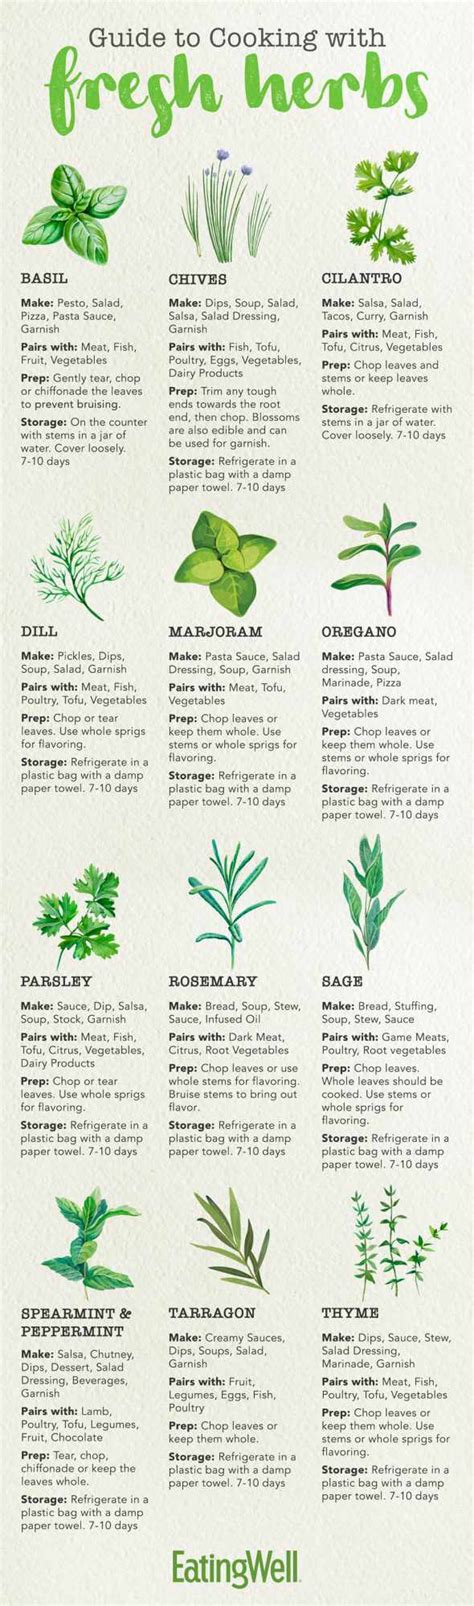 Guide To Cooking With Fresh Herbs